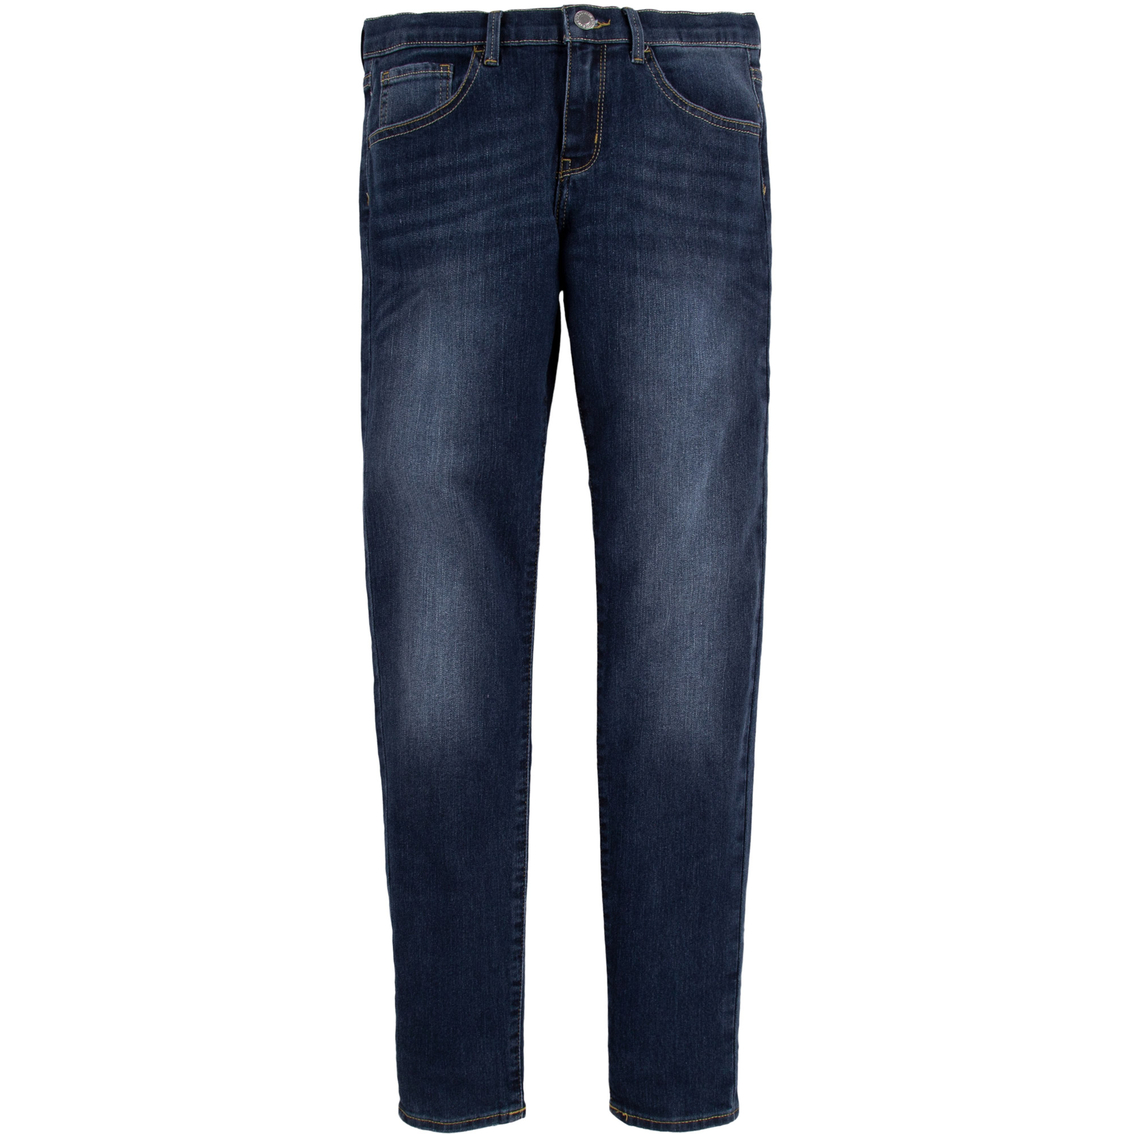 Levi's Super Skinny Fit Jeans | Girls 7-16 | Clothing & Accessories ...